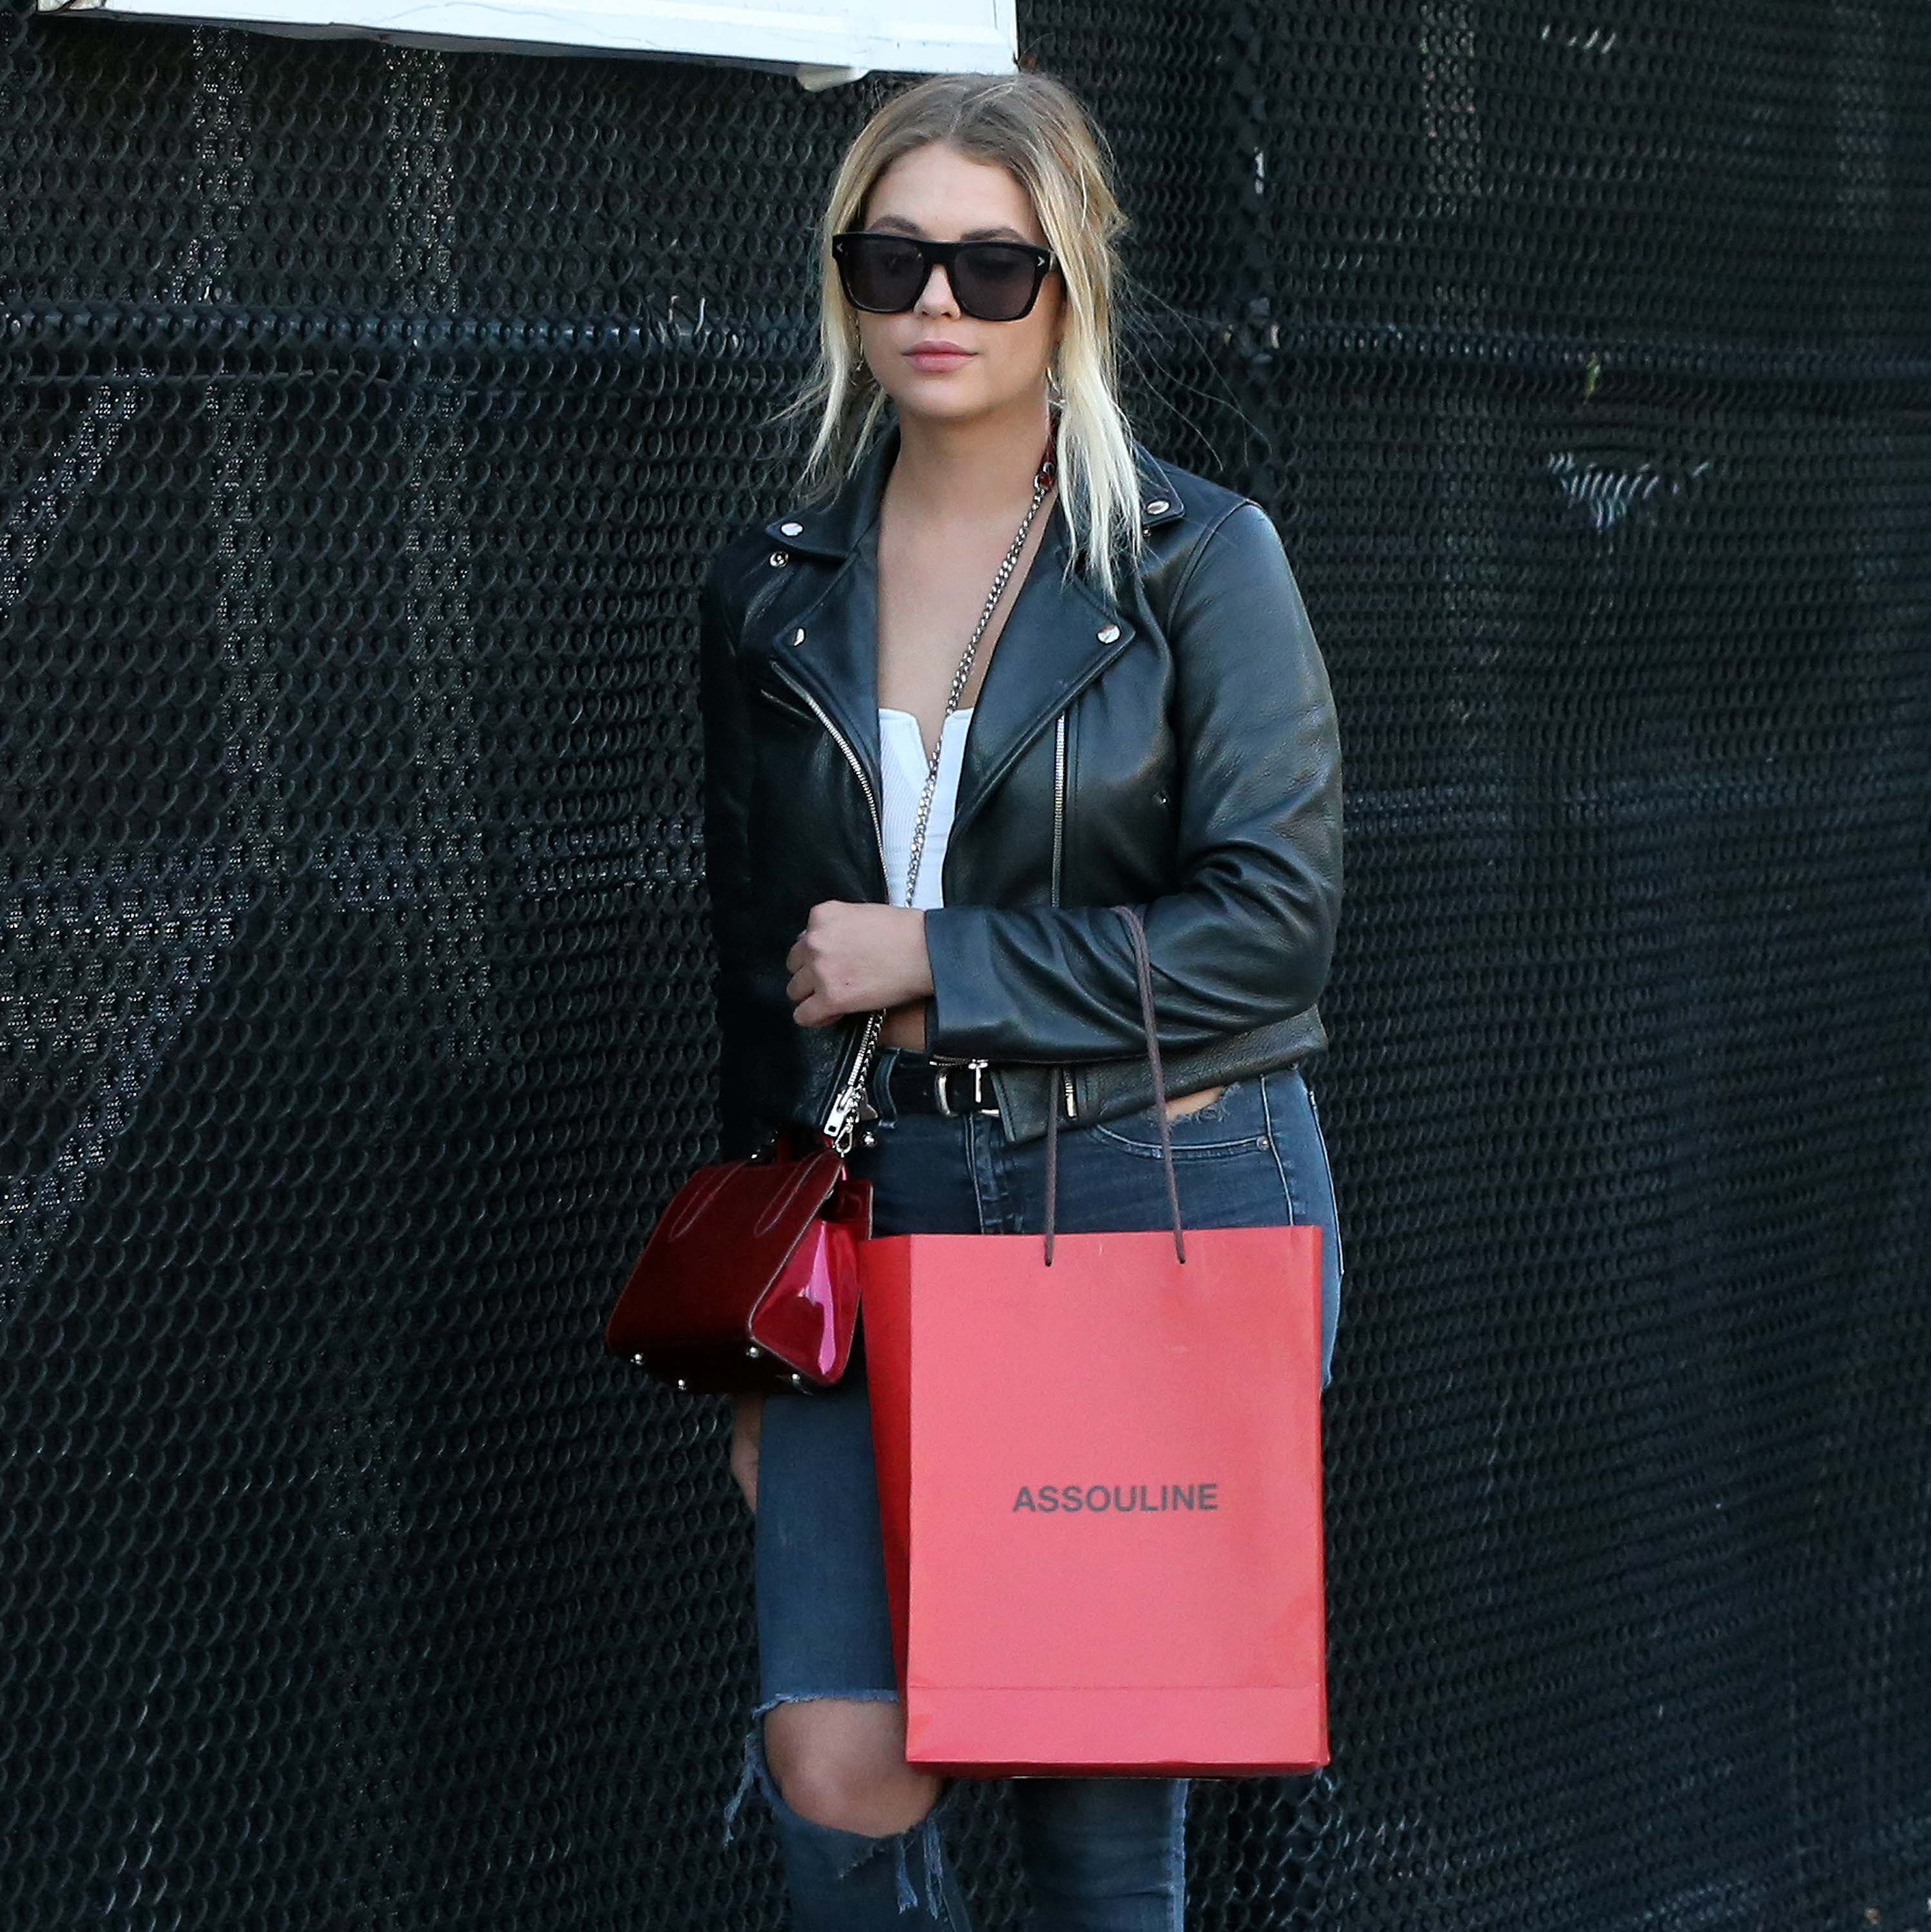 Ashley Benson at a heliport in NYC